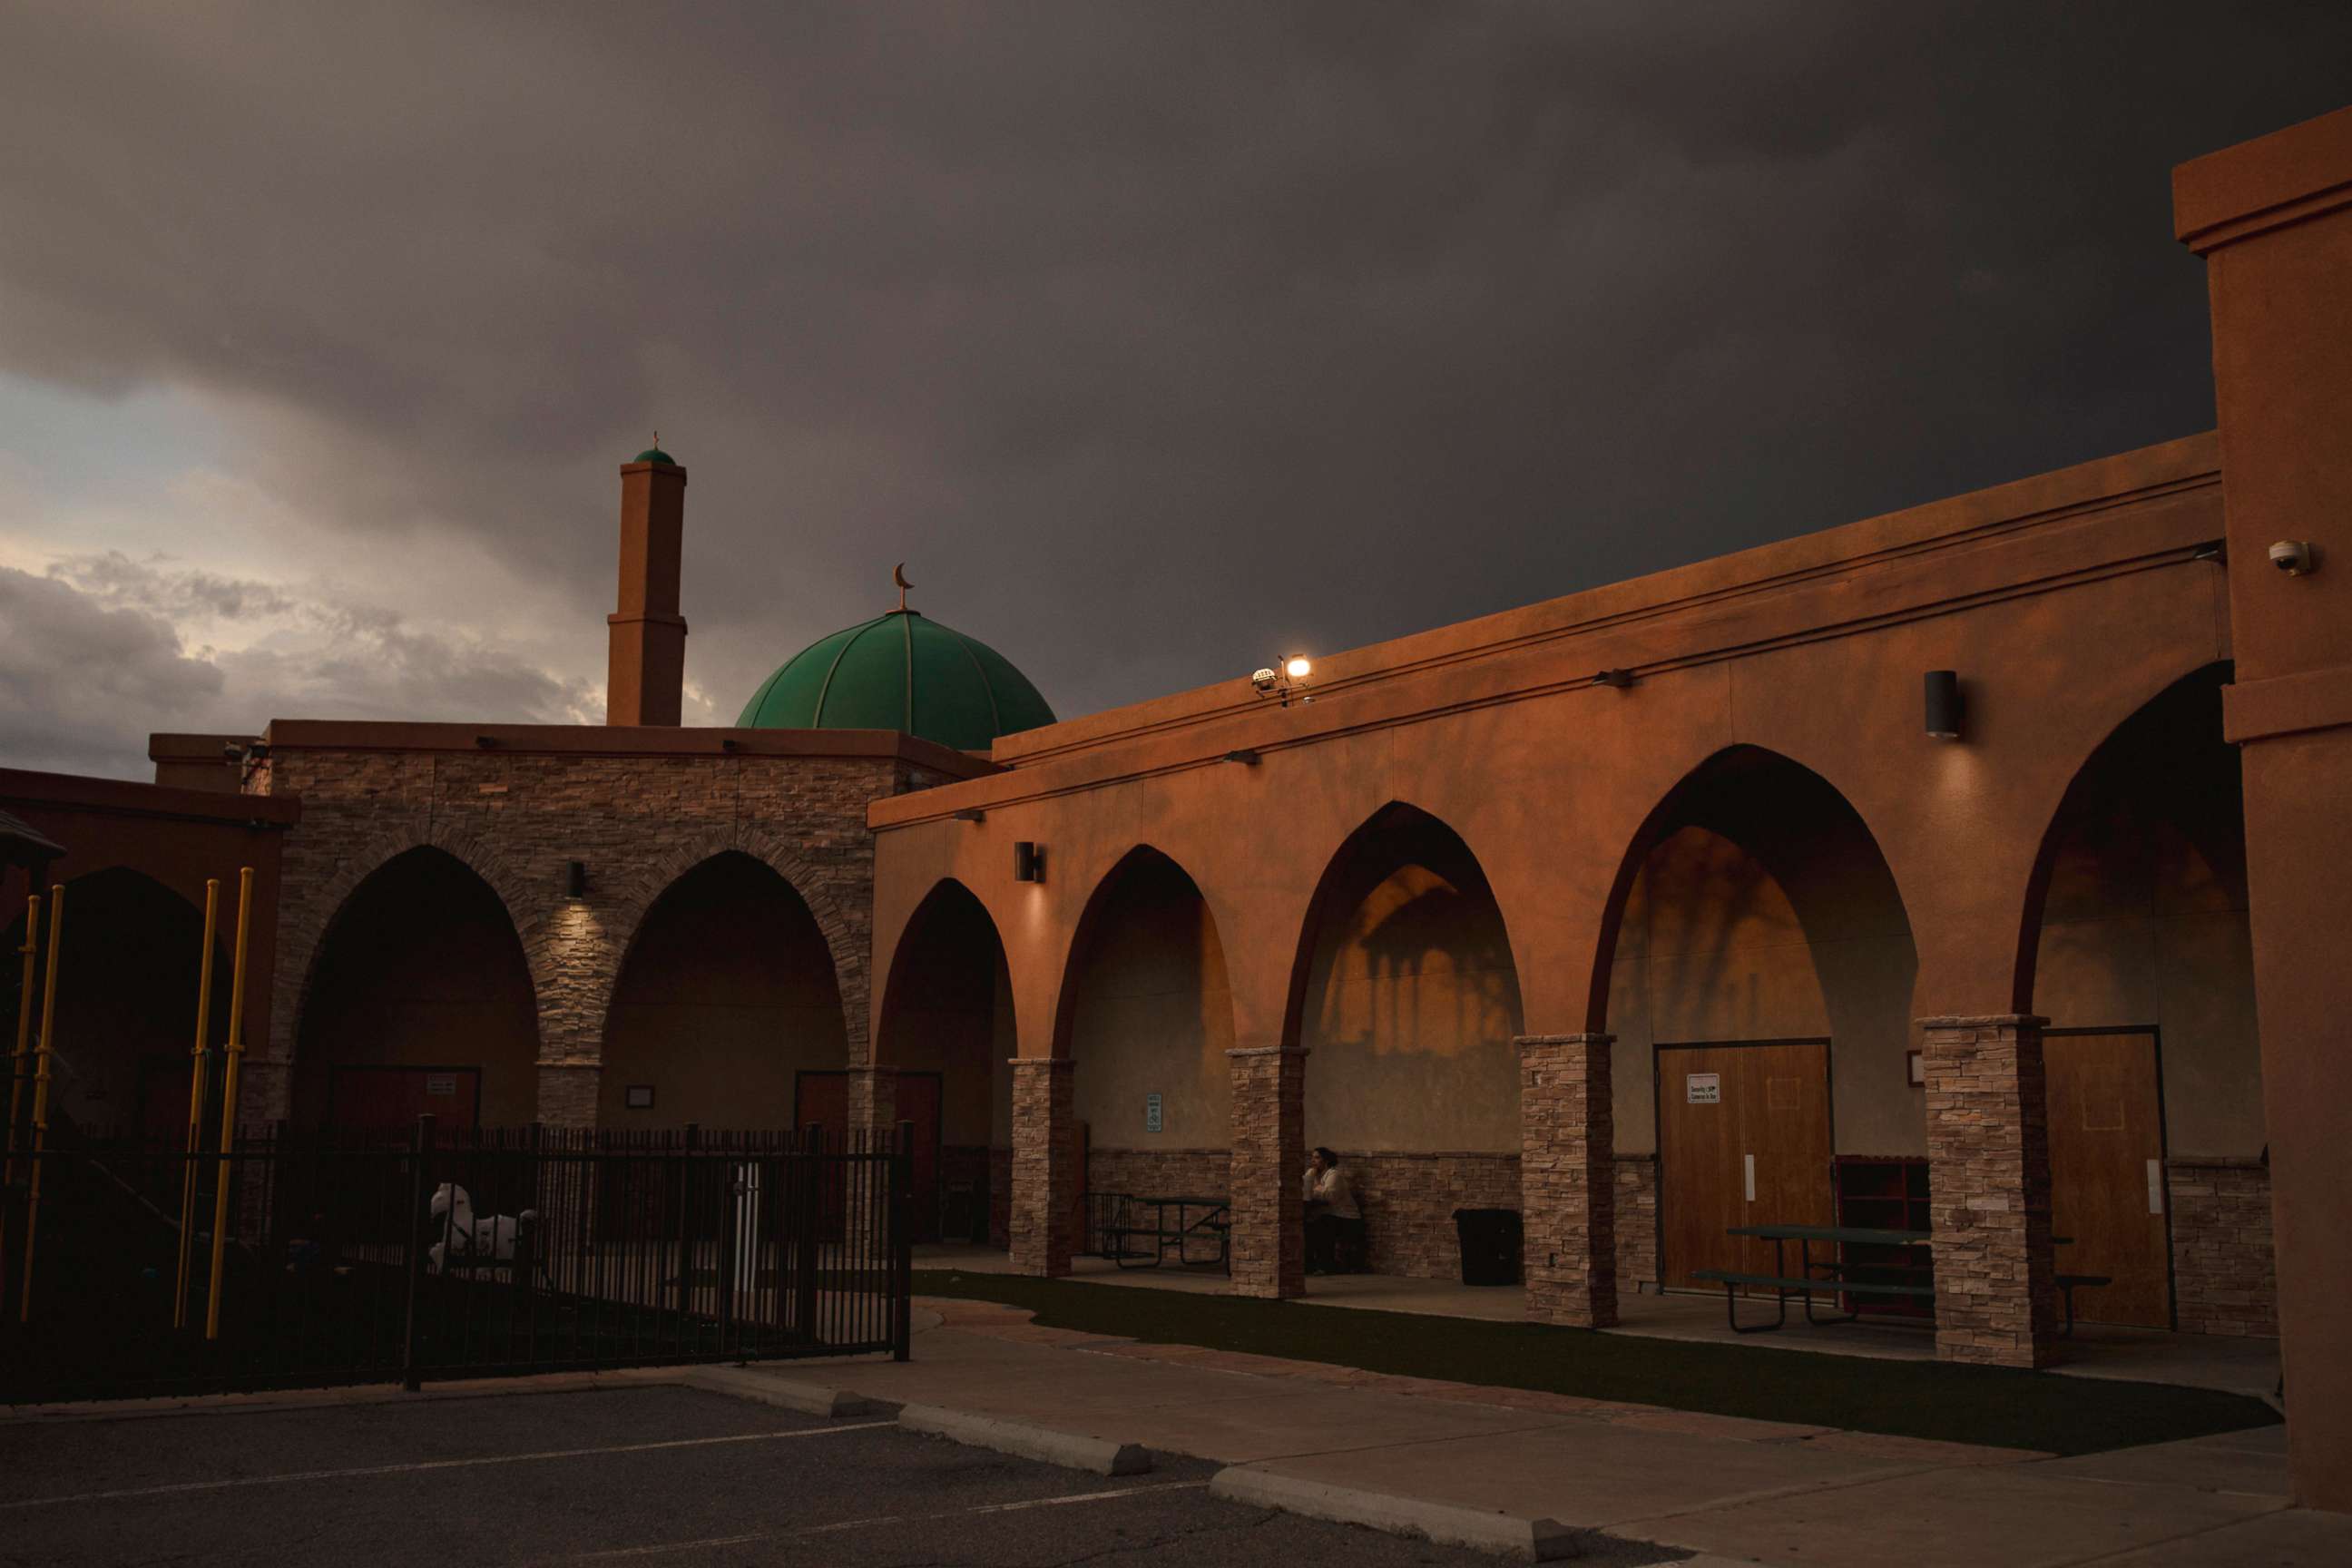 PHOTO: The Islamic Center of New Mexico, where three victims of apparently targeted killings attended, is shown in Albuquerque, Aug. 7, 2022.